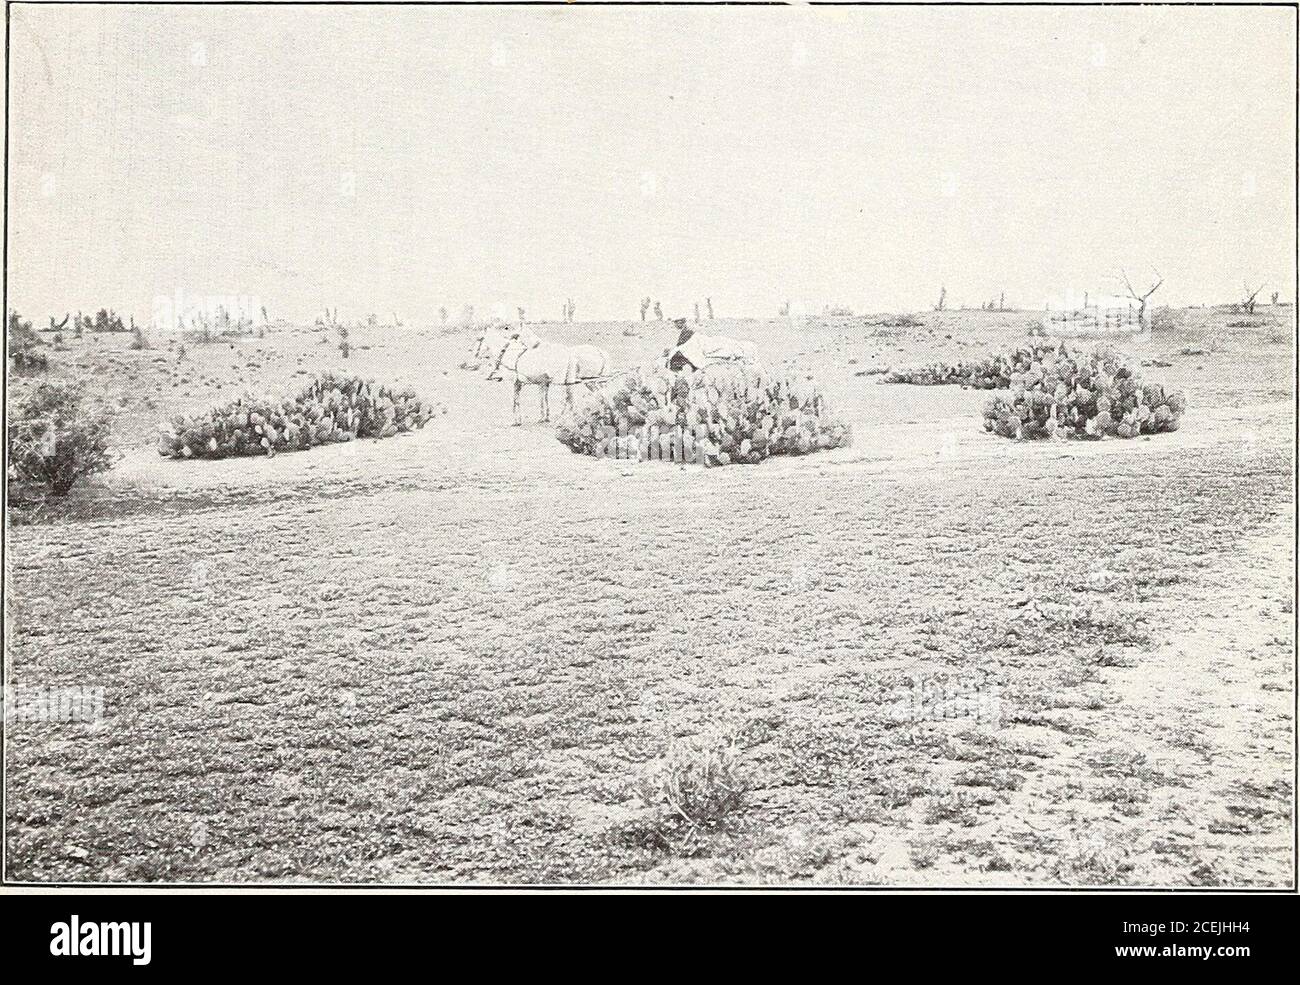 . Range investigations in Arizona. Fig. 1.—Alfilerilla and Indian Wheat near Dudleyville. In the Central Fore-ground is Shown Closely Grazed Bushes of Jojoba (Simondsia californica).. Fig. 2.—Alfilerilla and Indian Wheat near Oracle. Opuntia engelmanni, Yuccaradiosa, and Mesquite (Prosopis velutina) are the Conspicuous Plants. ALFILERILLA RANGE. Bui. 67, Bureau of Plant Industry, U. S. Dept. of Agriculture. Plate VII Stock Photo